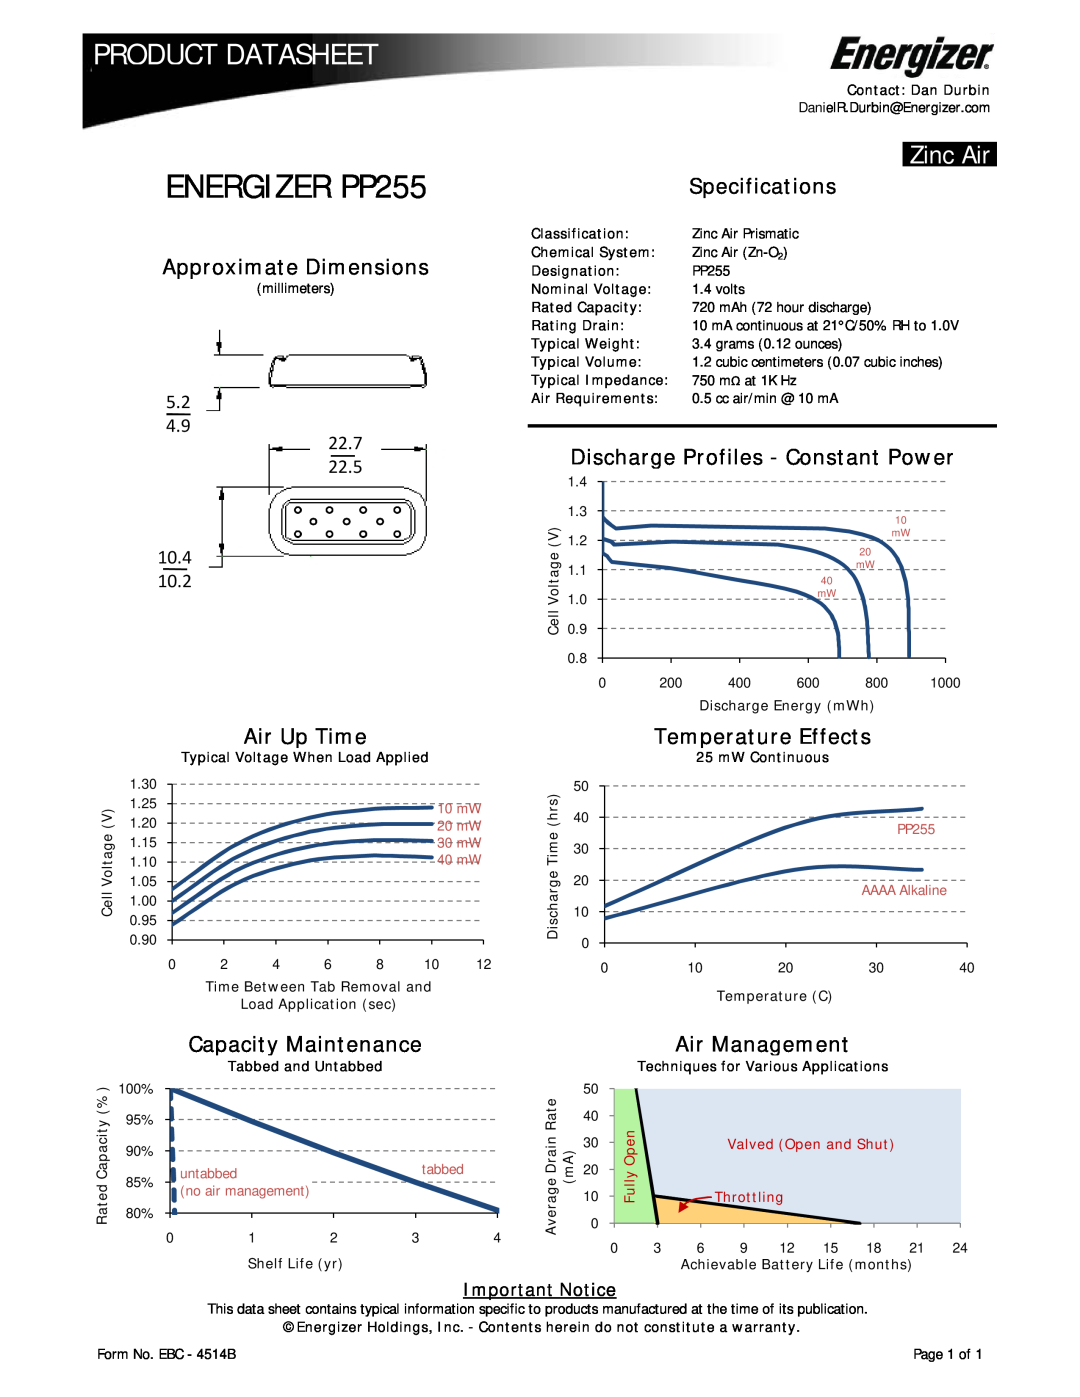 Energizer specifications ENERGIZER PP255, Product Datasheet, Zinc Air, Approximate Dimensions, Air Up Time, 10 mW 